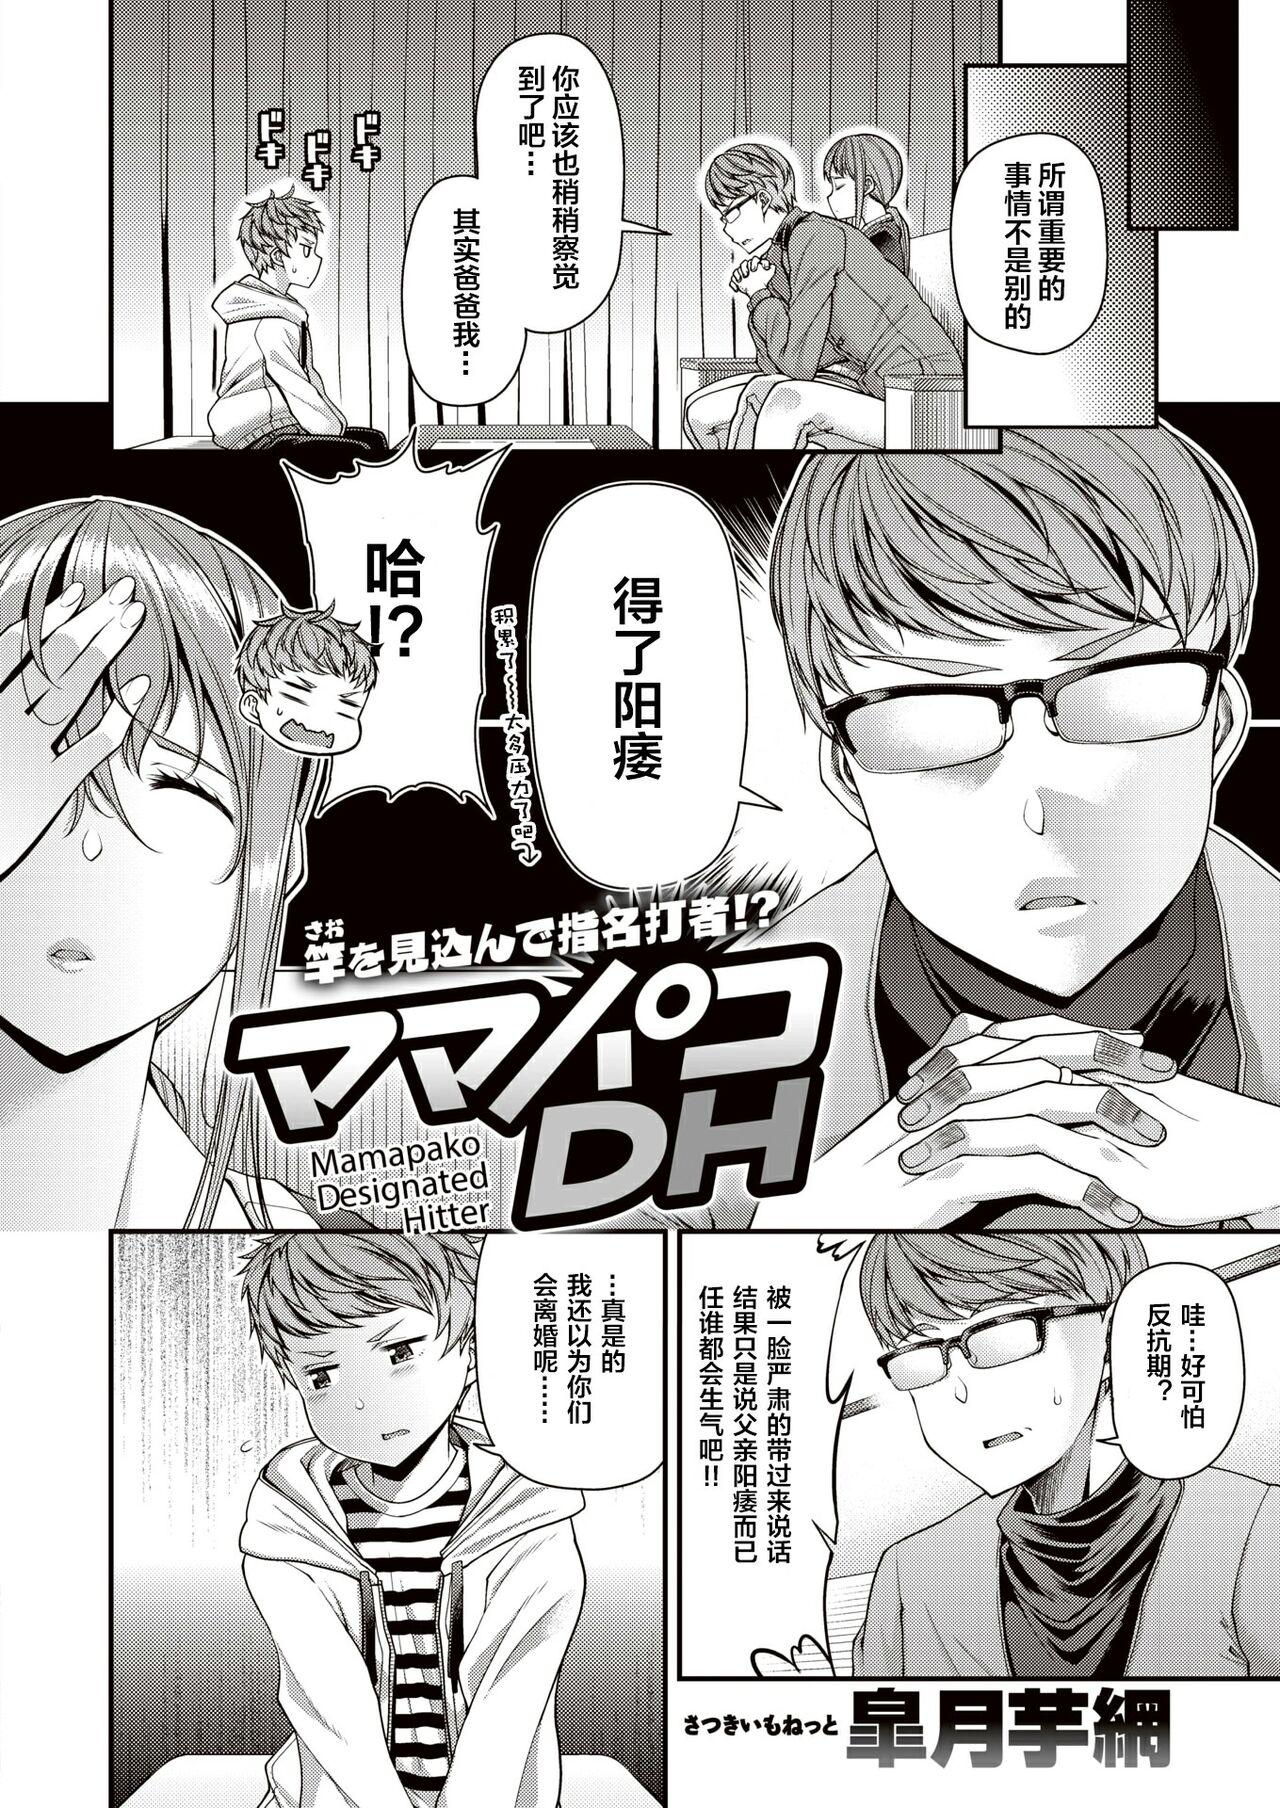 Young Men ママパコDH Online - Page 2